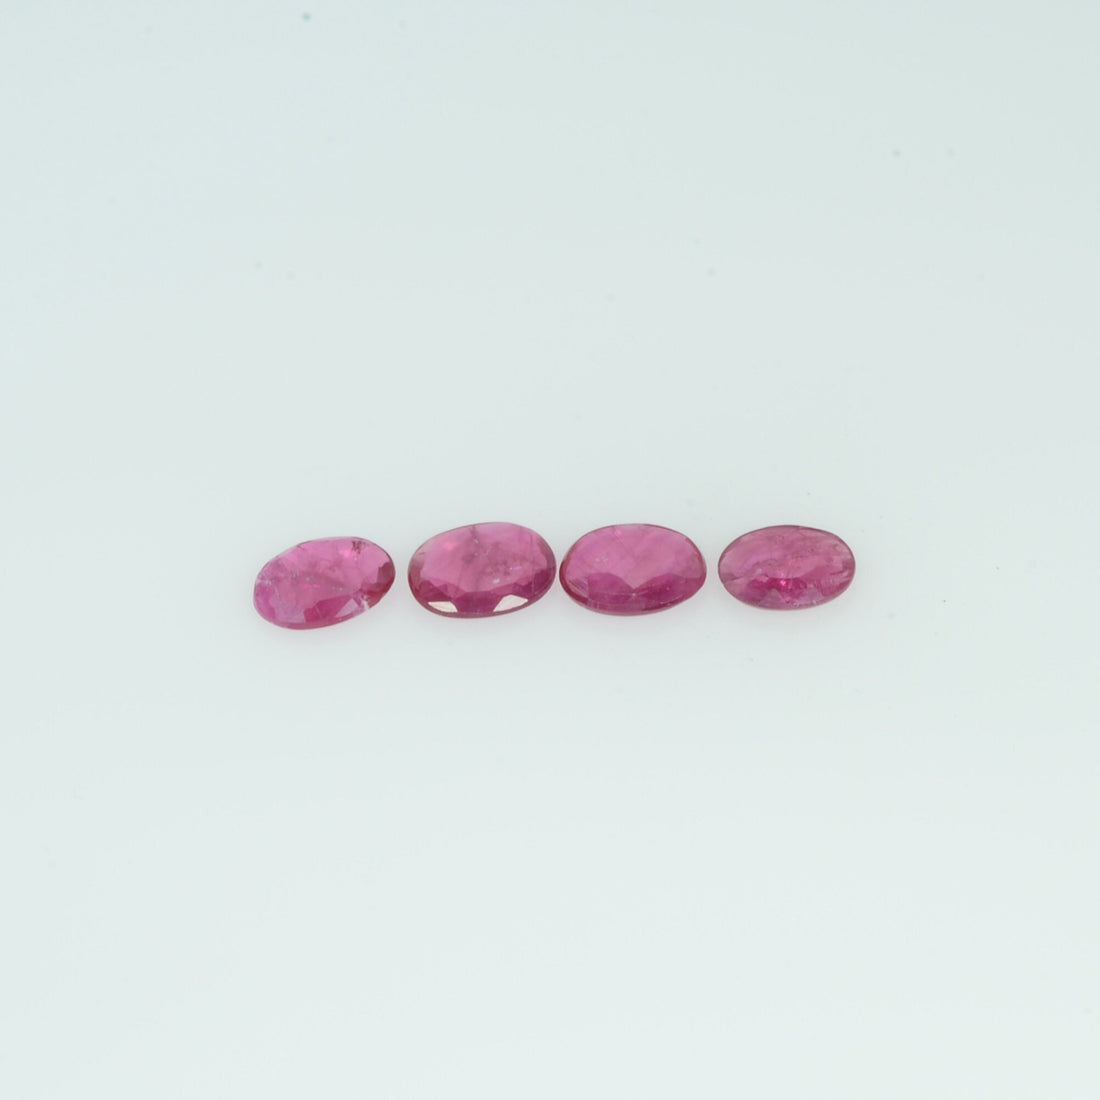 4x3 MM Natural Ruby Loose Gemstone Oval Cut